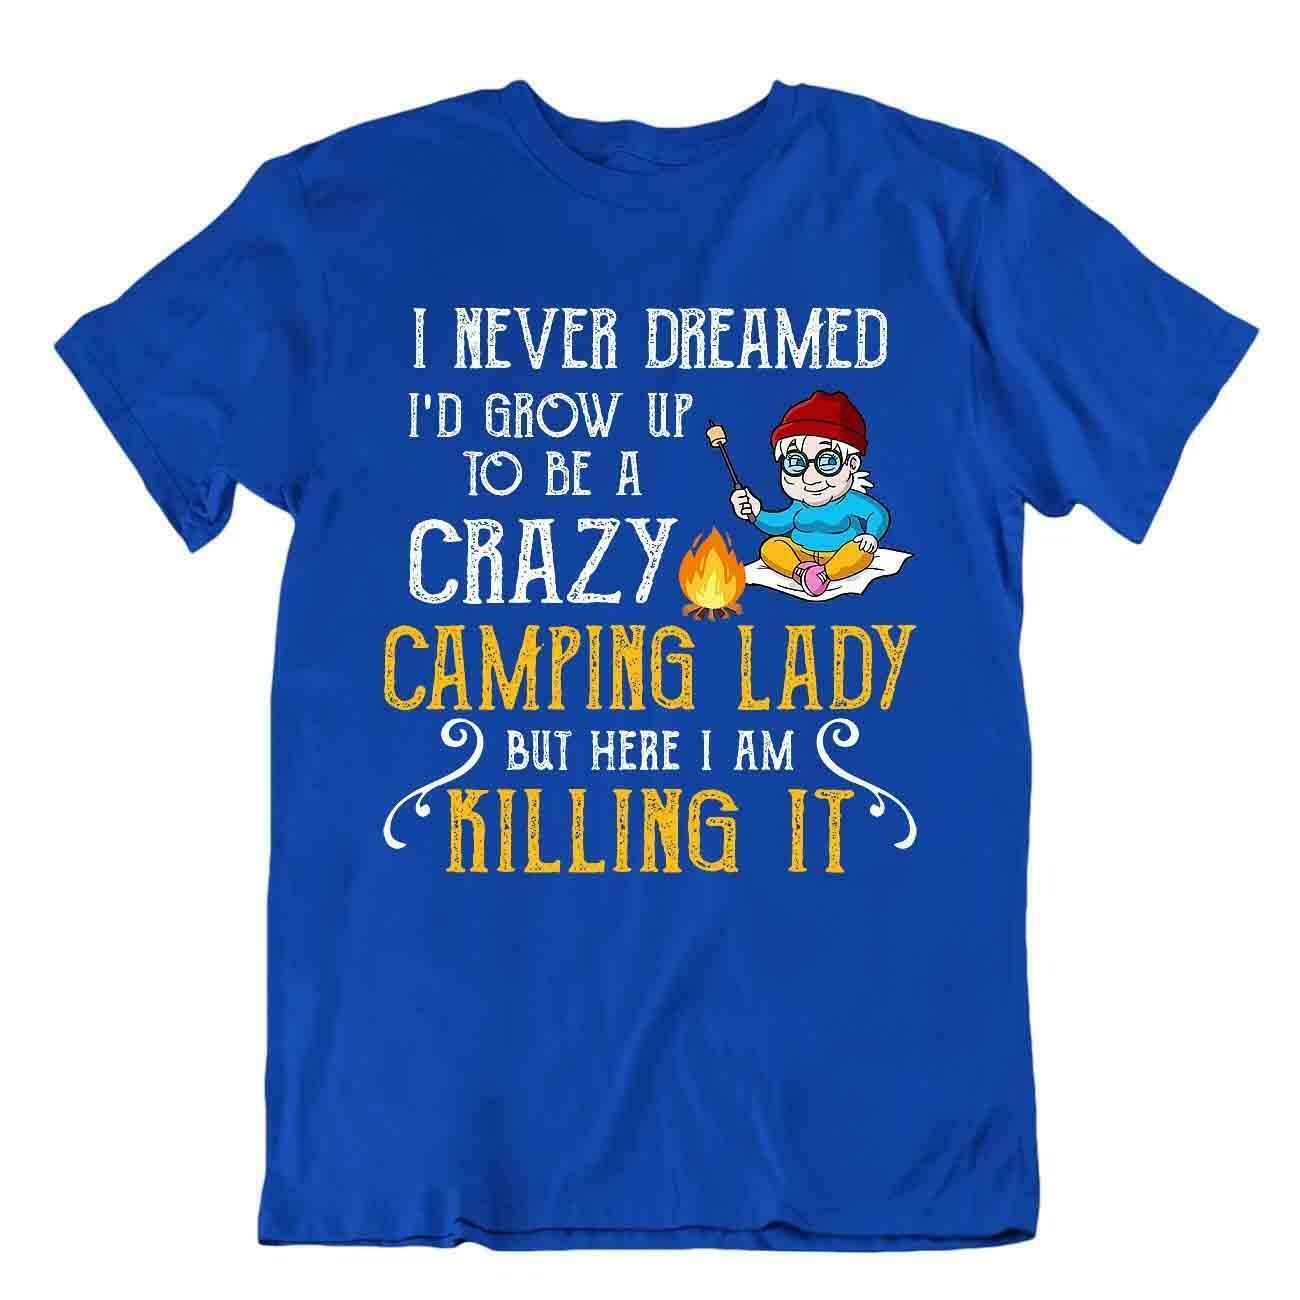 Camping Outside Trip Tshirt Tee Vintage Gift Cute Funny Outdoor Fresh Crazy Lady